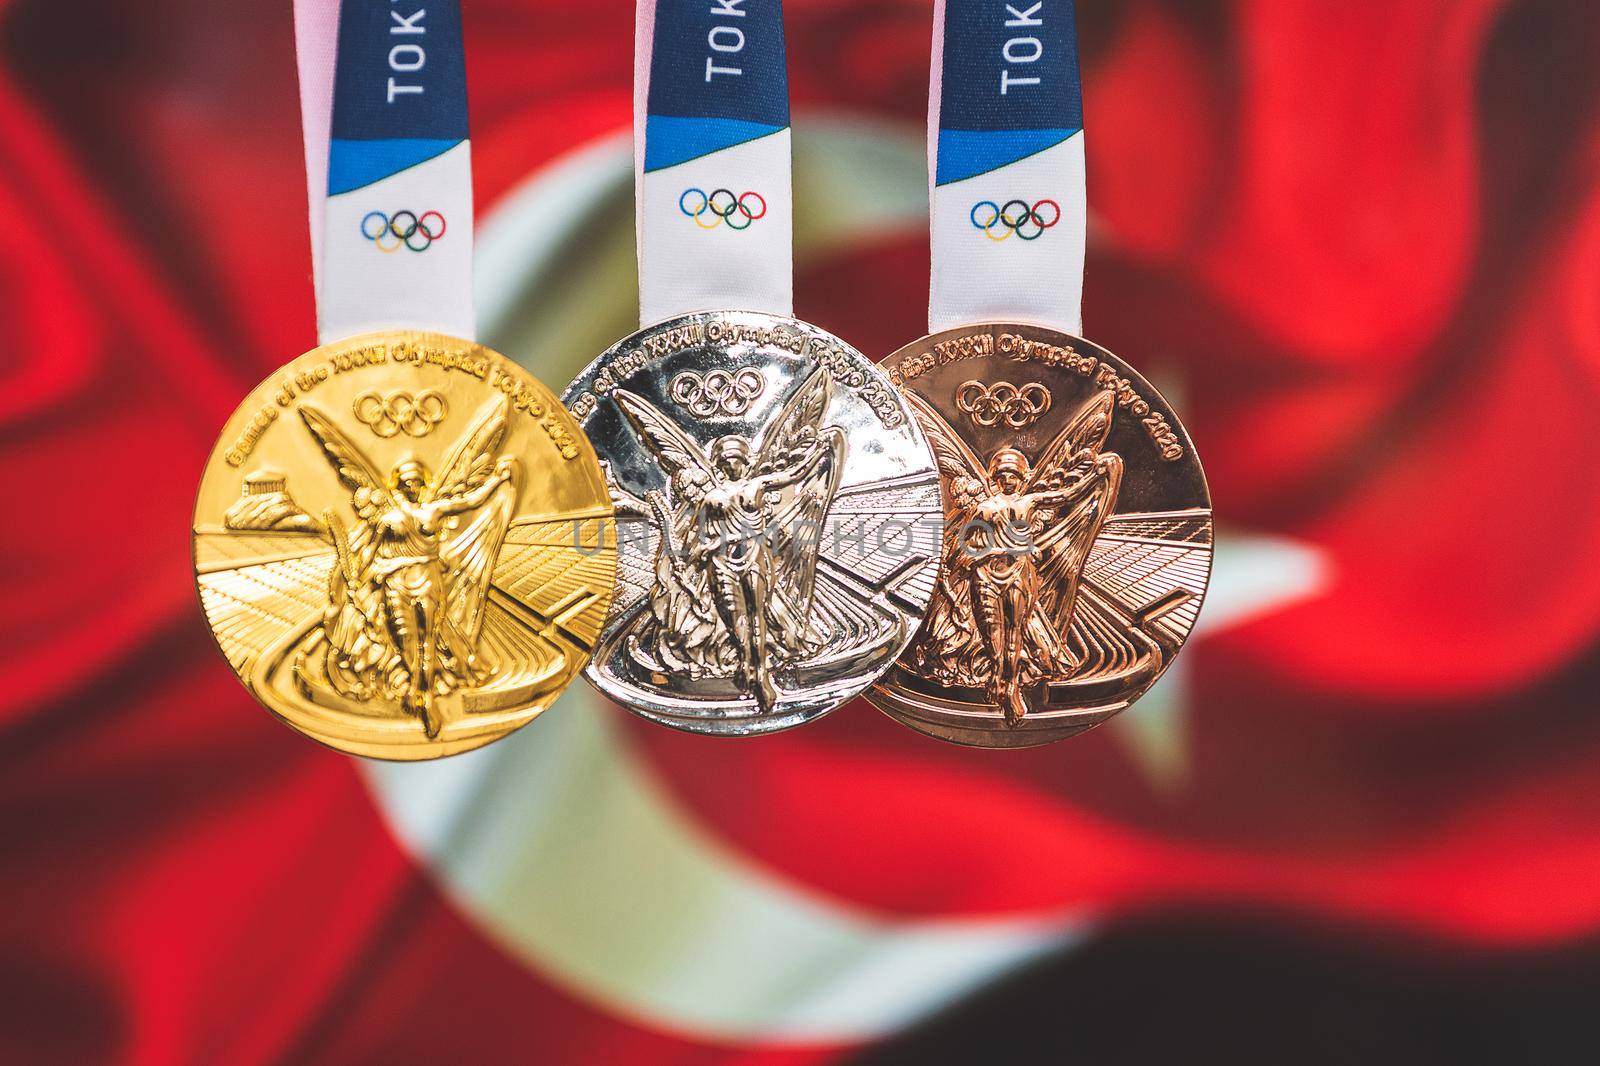 April 25, 2021 Tokyo, Japan. Gold, silver and bronze medals of the XXXII Summer Olympic Games 2020 in Tokyo on the background of the flag of Turkey.